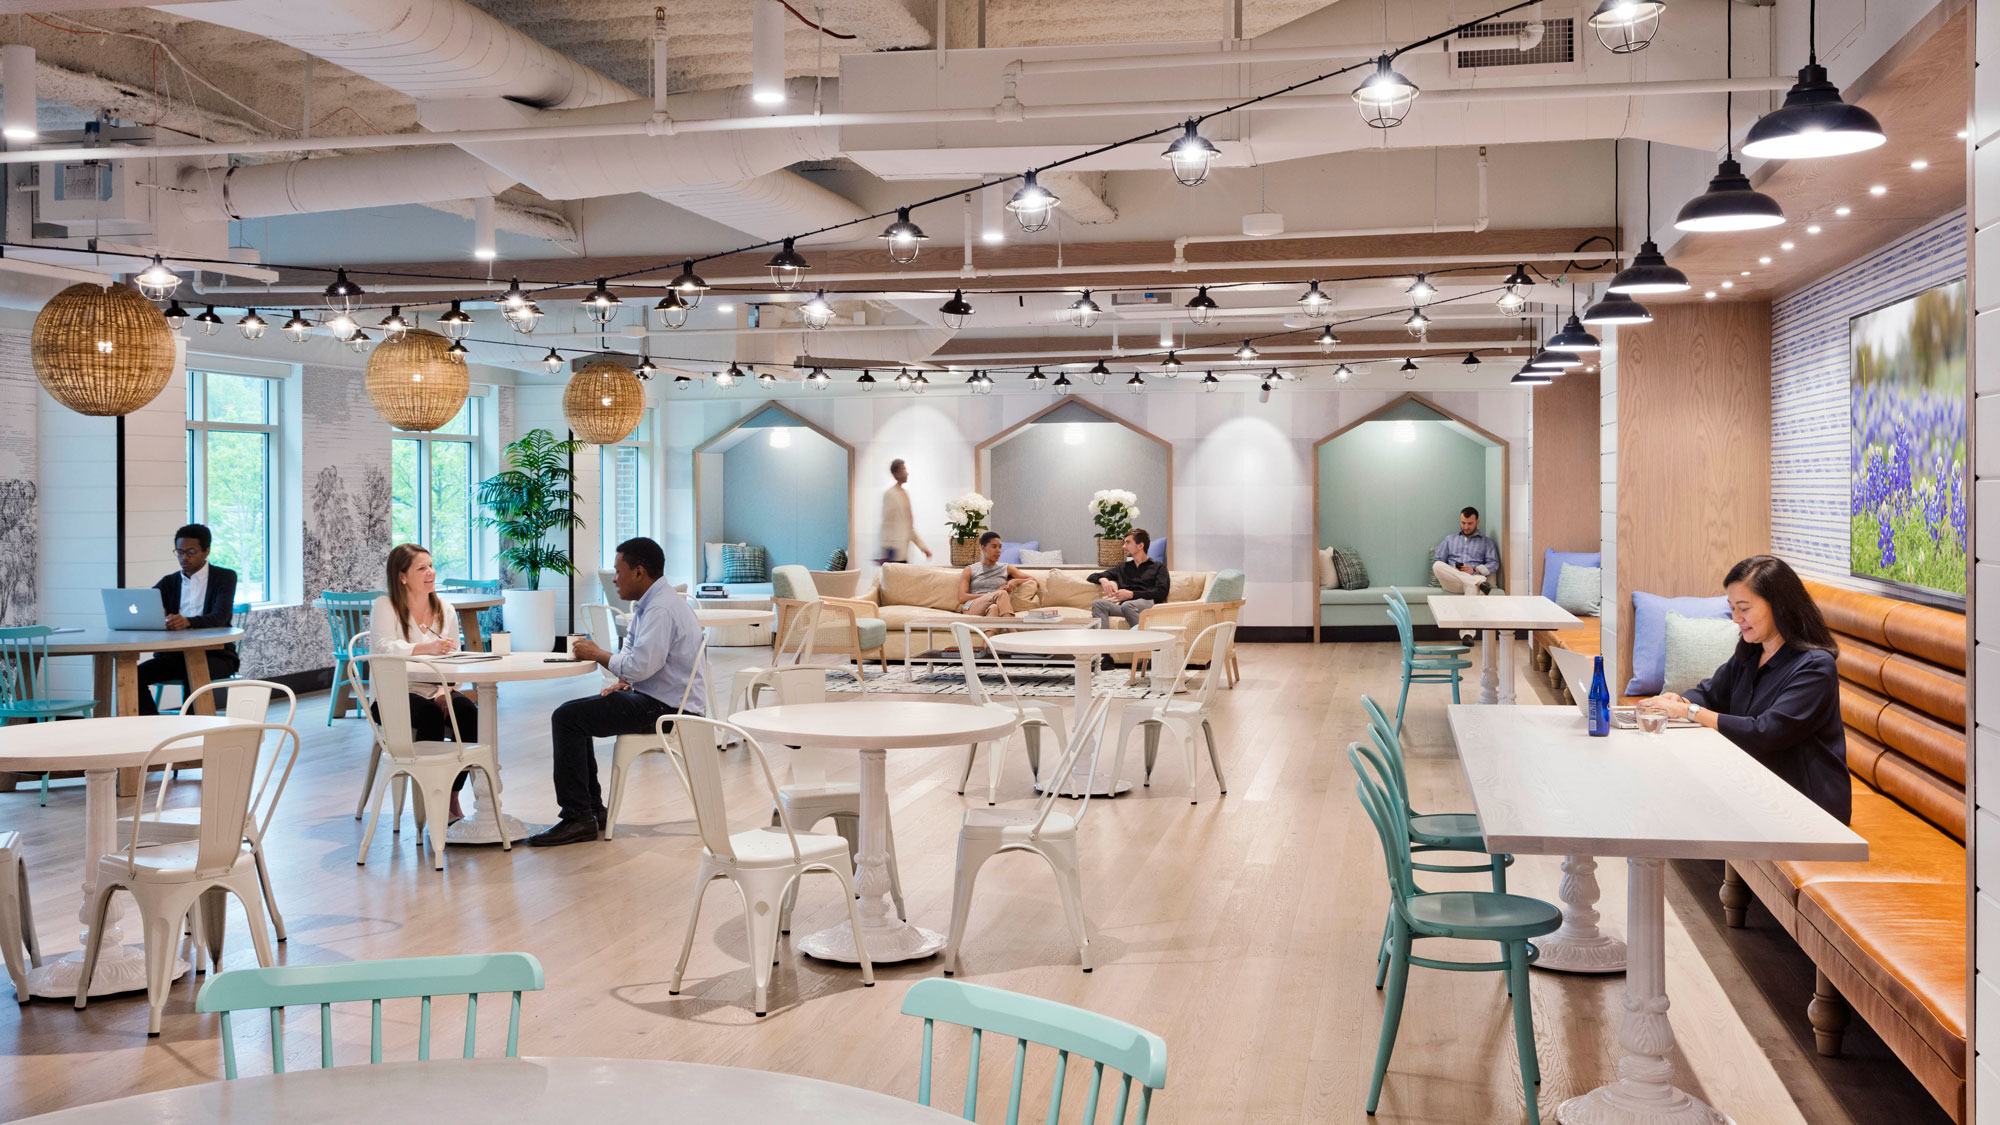 Employee cafe with comfortable seating